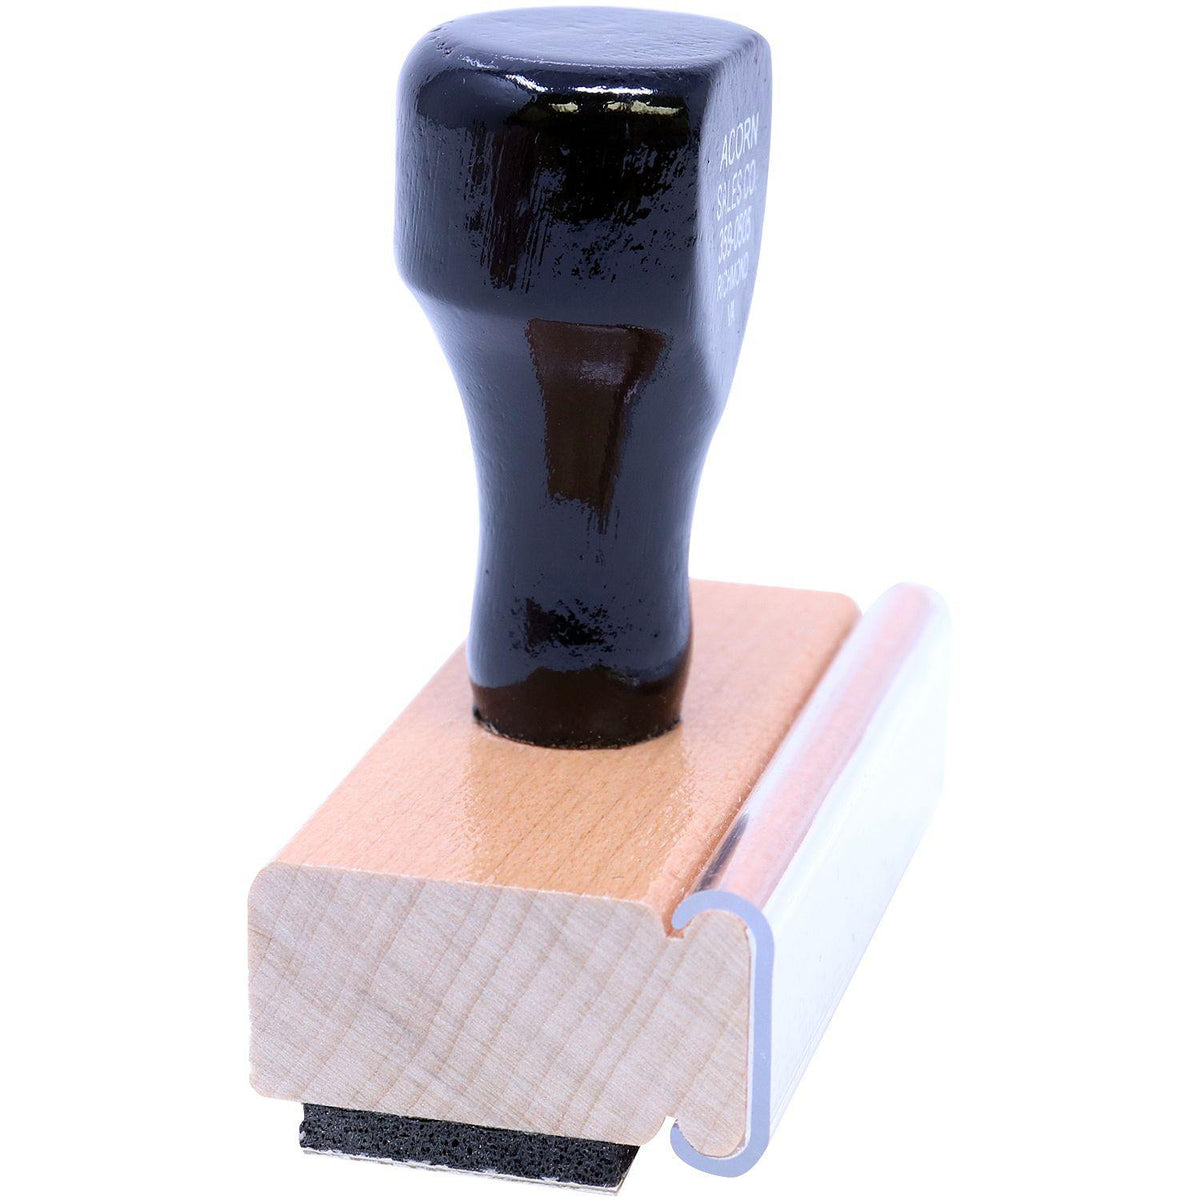 Side View of Good Job Rubber Stamp at an Angle